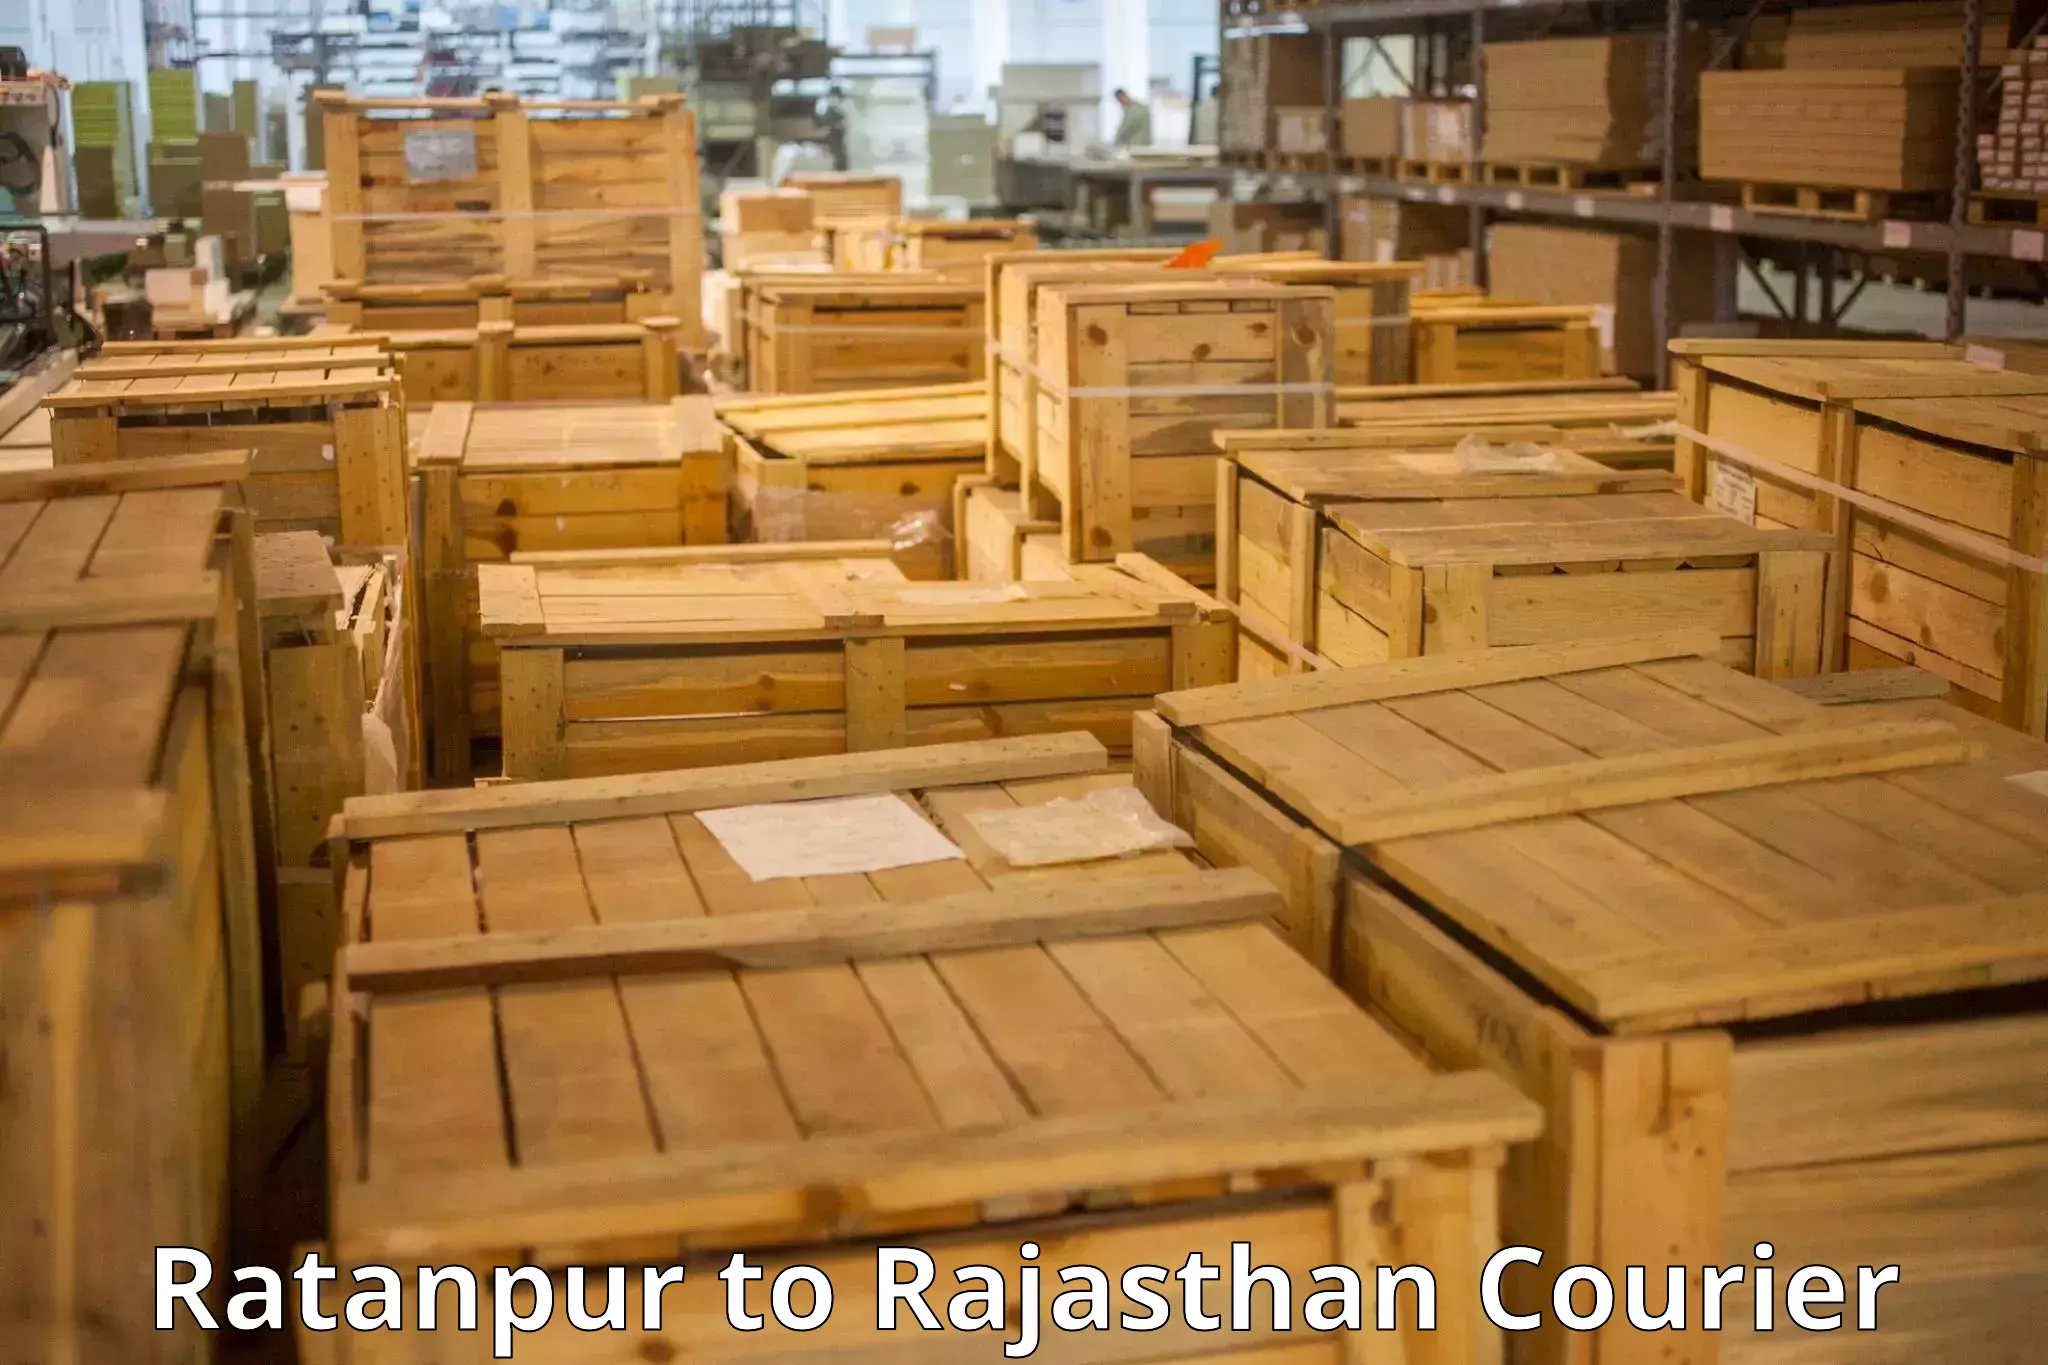 Baggage transport professionals Ratanpur to Udaipur